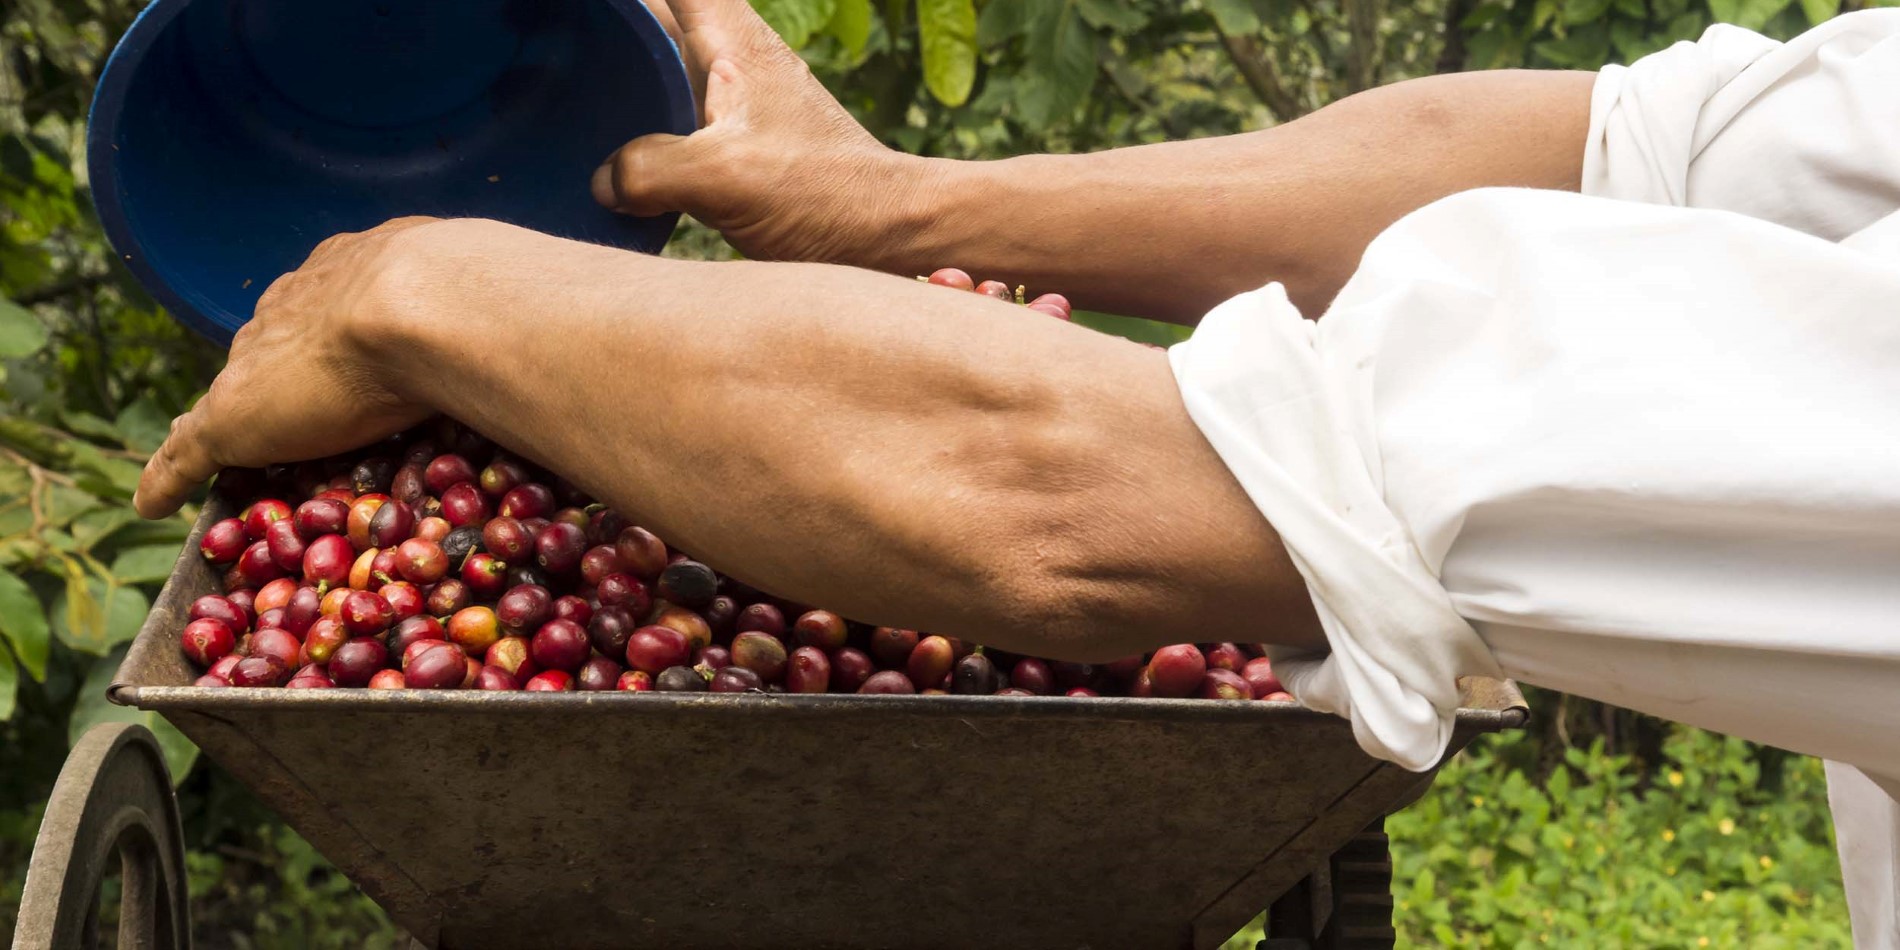 Take a tour at a coffee plantation to learn how these red berries are transformed into the world’s favourite drink.